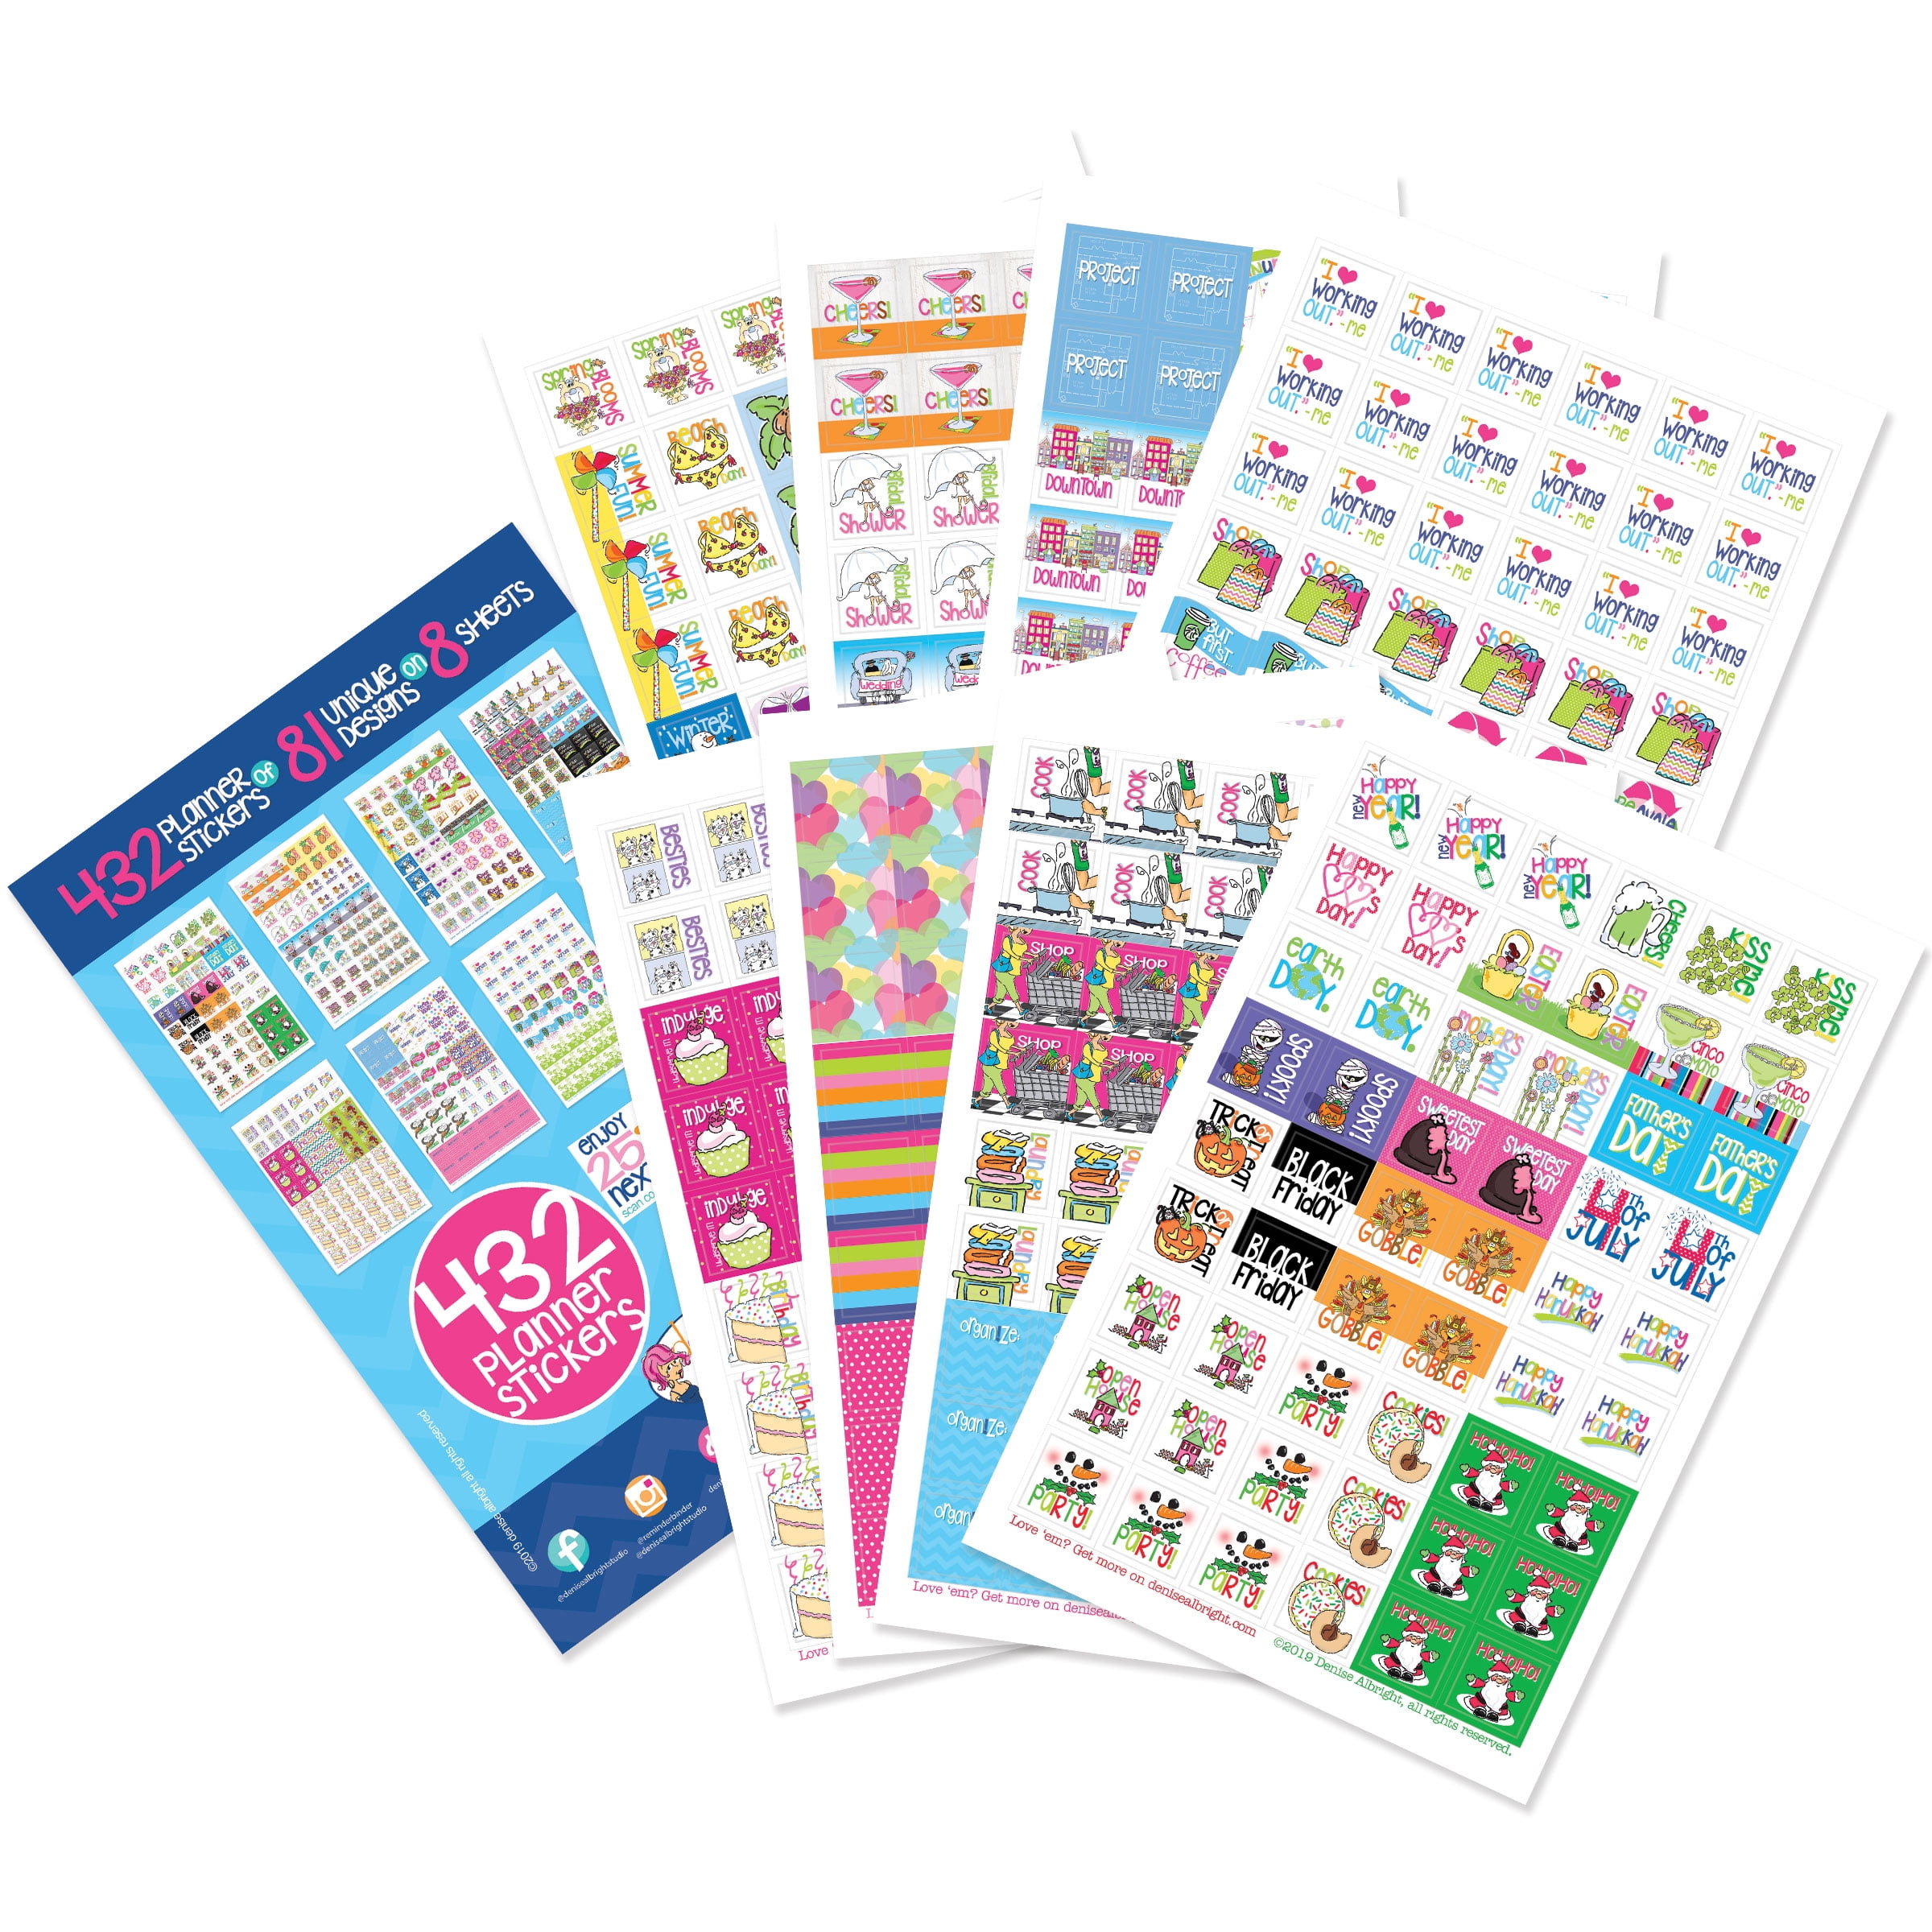 Revelova 500+ Seasonal Monthly Planner Stunning Stickers for Daily Planners